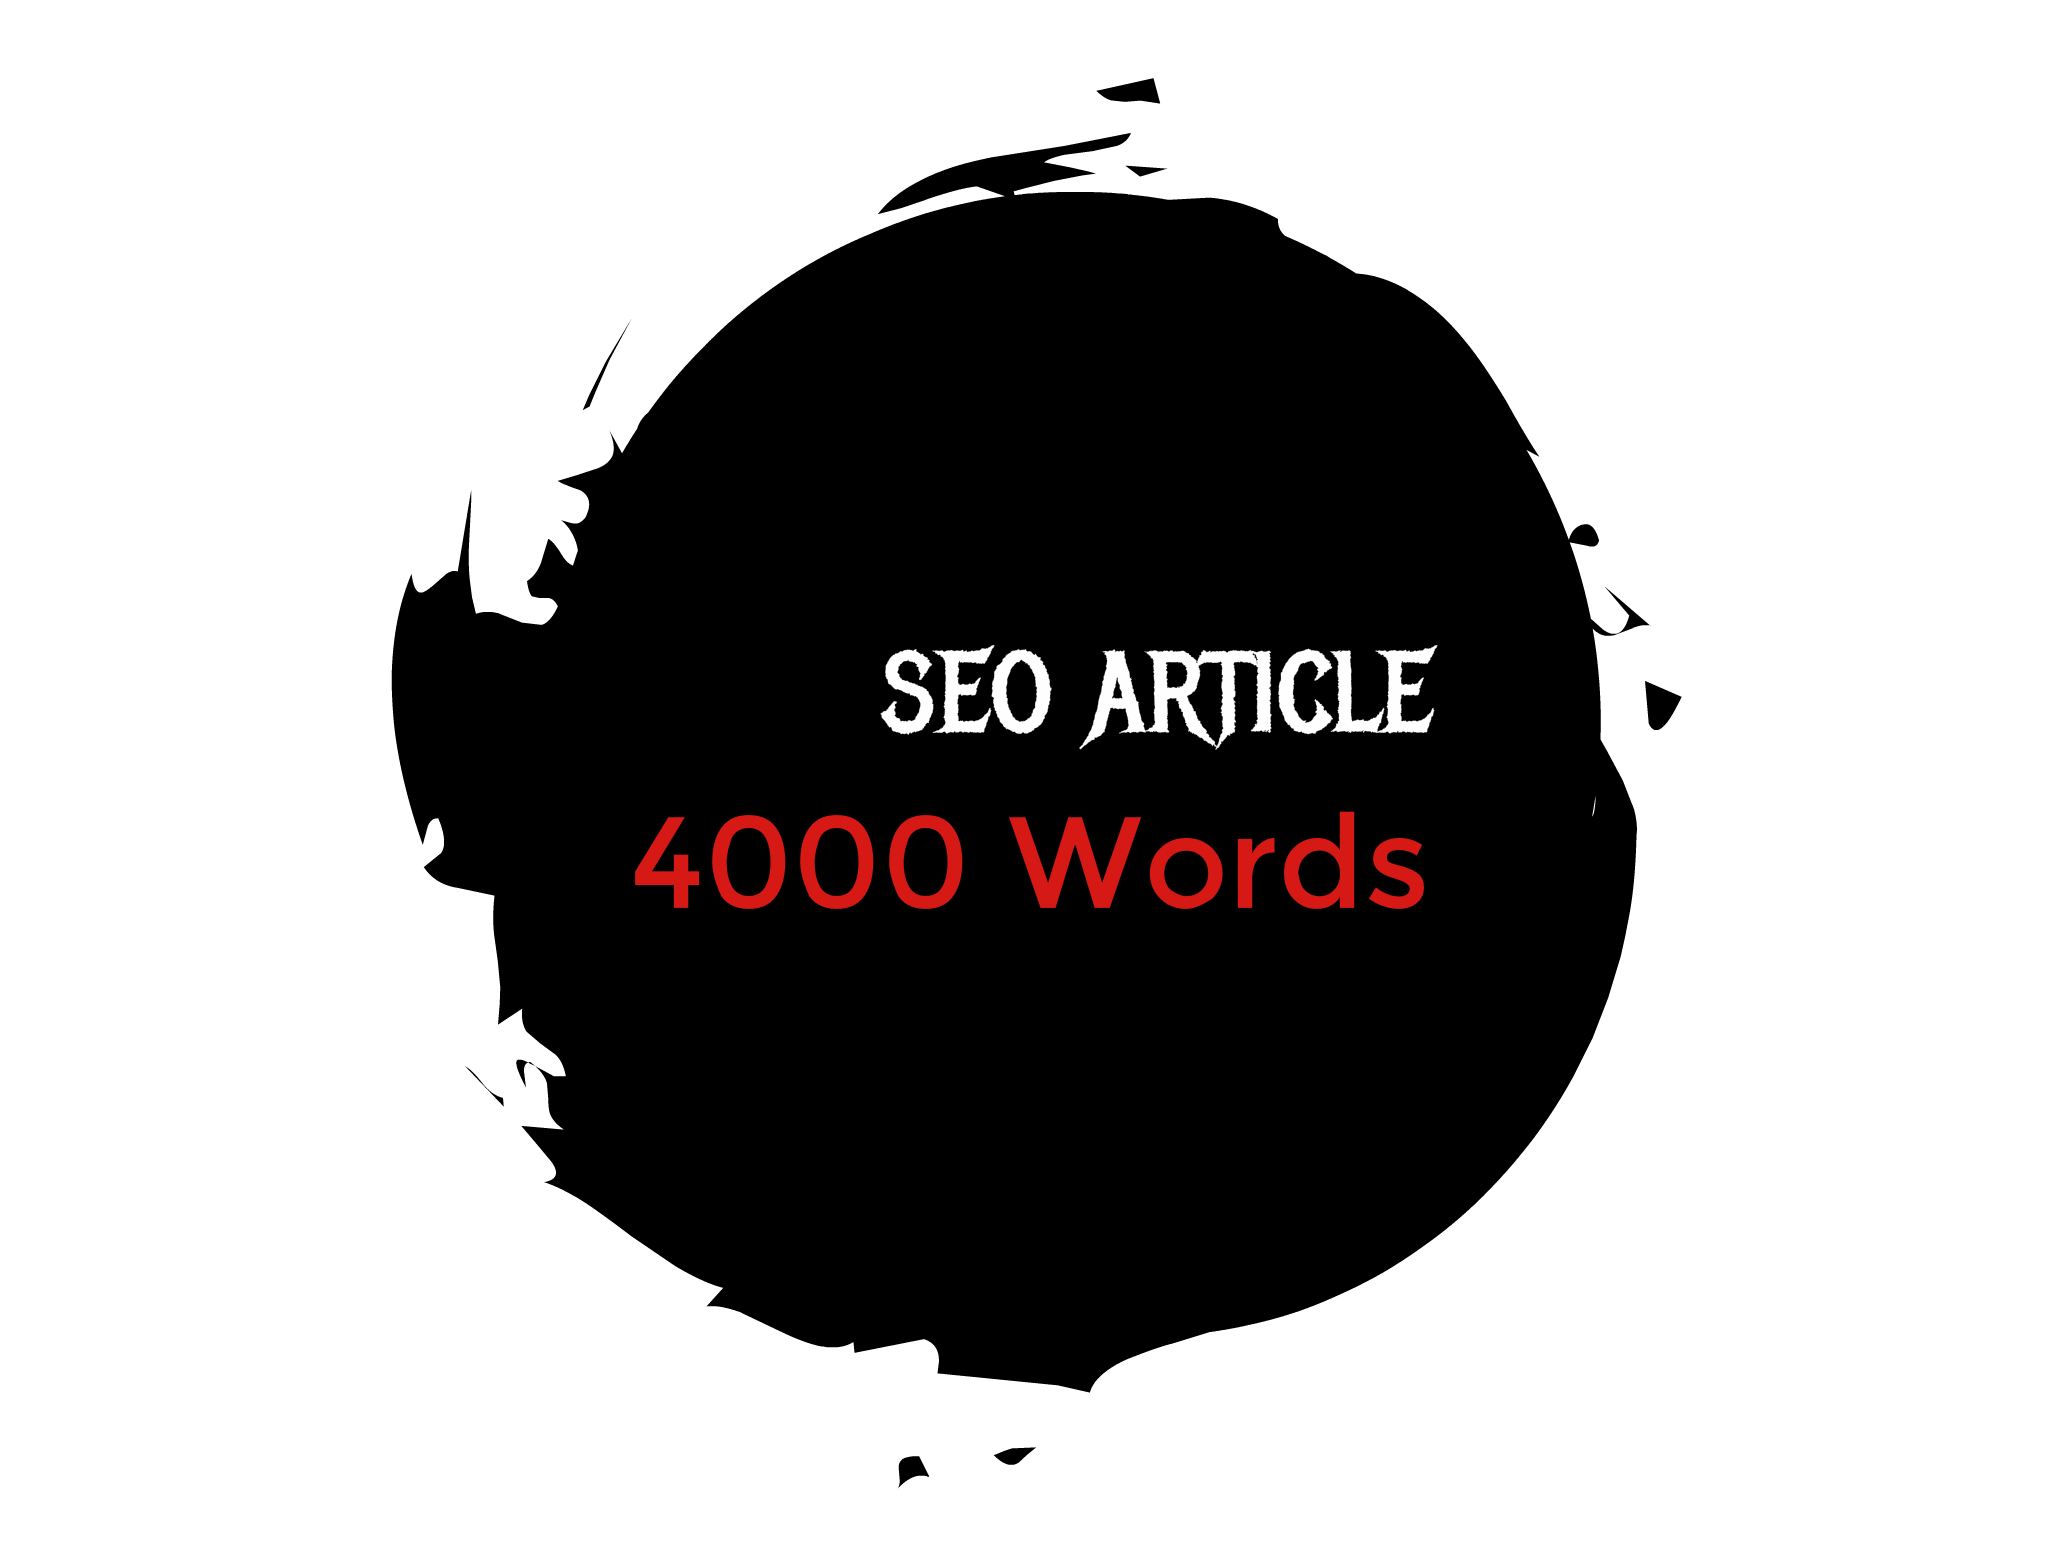 SEO Article 4000 Words